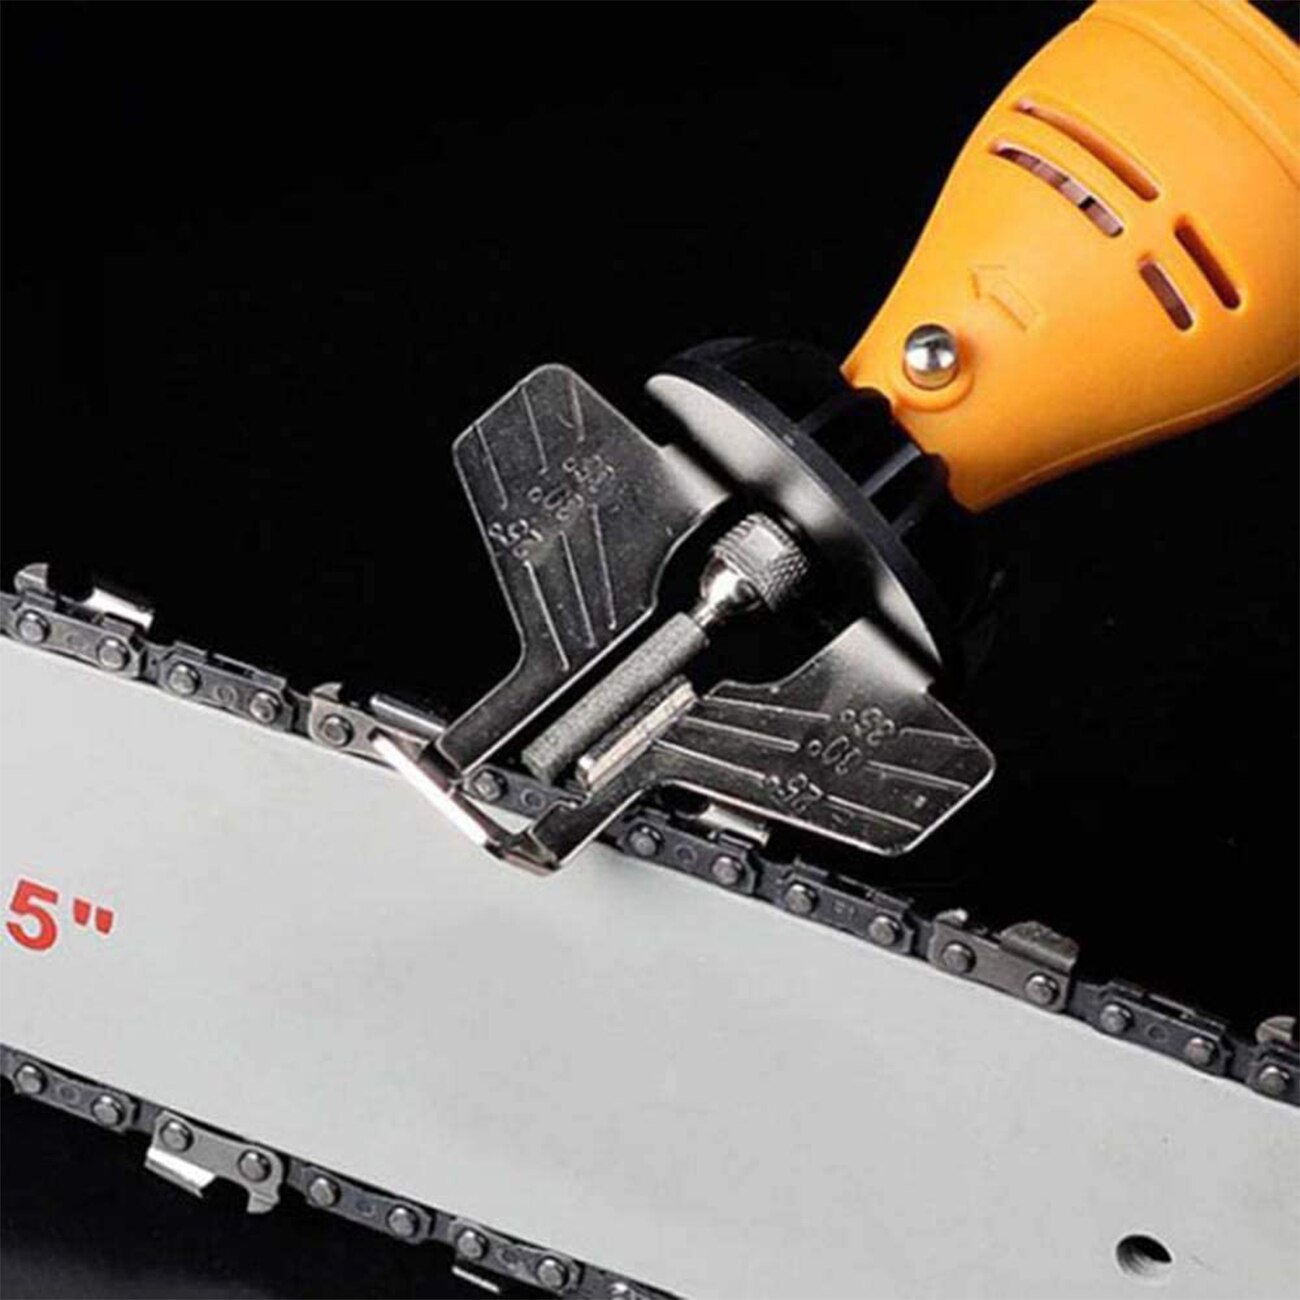 Chain Saw Sharpening Attachment Sharpener Guide Drill Adapter Head Chainsaw Sharpening Attachment Rotary Tool Accessory Kit